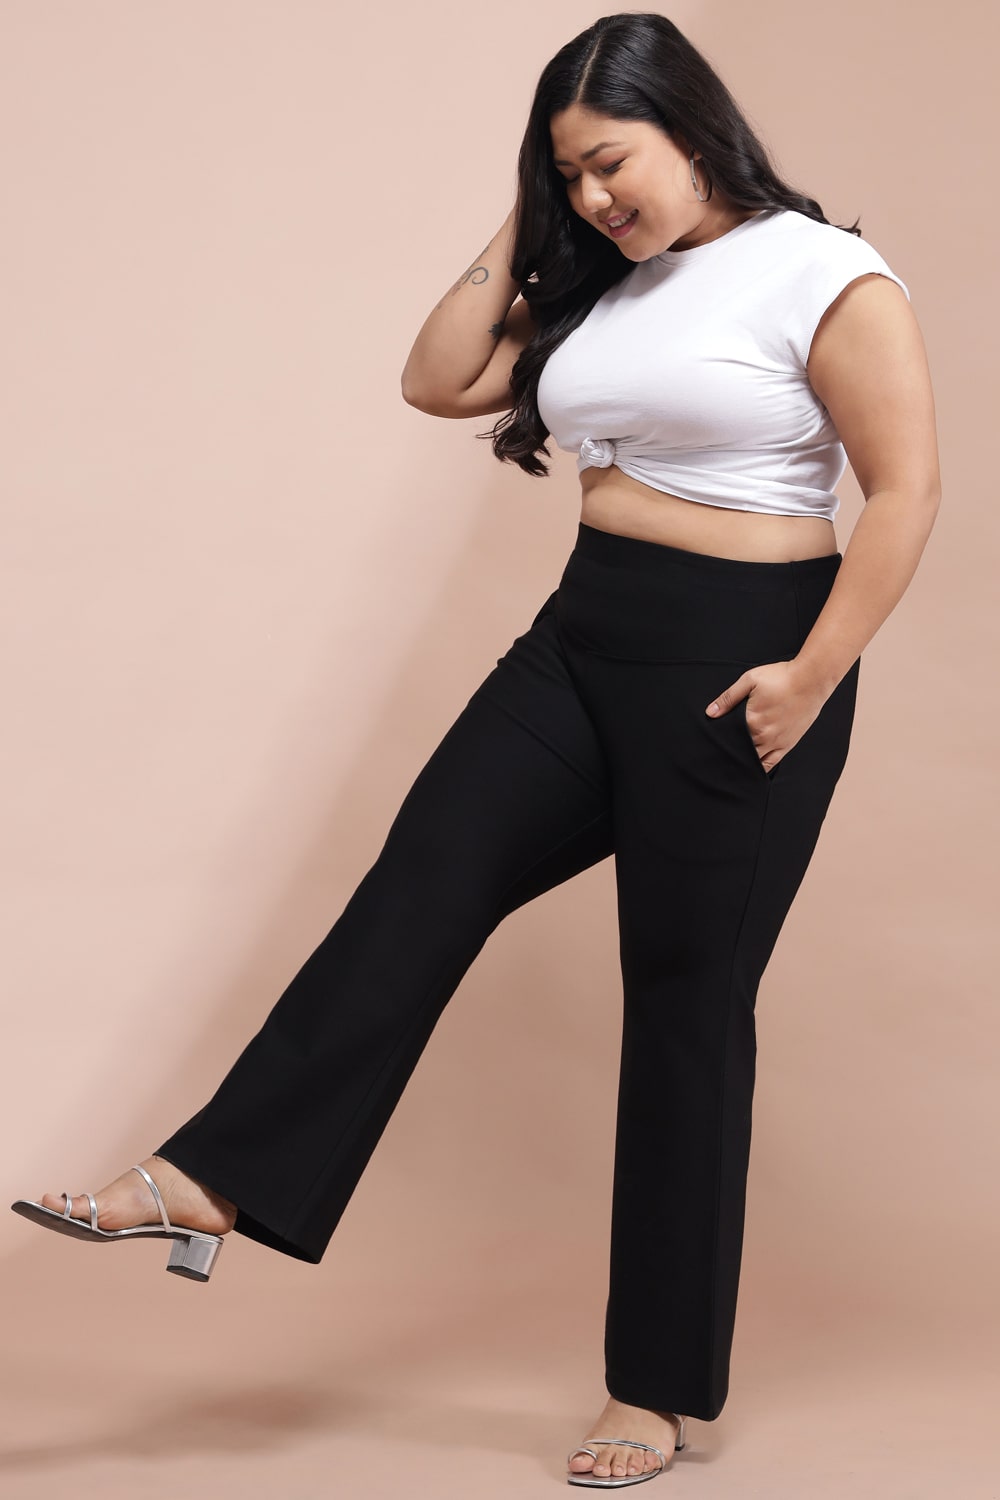 Plus Size  Shop for Plus Size Clothing Online in India  Myntra